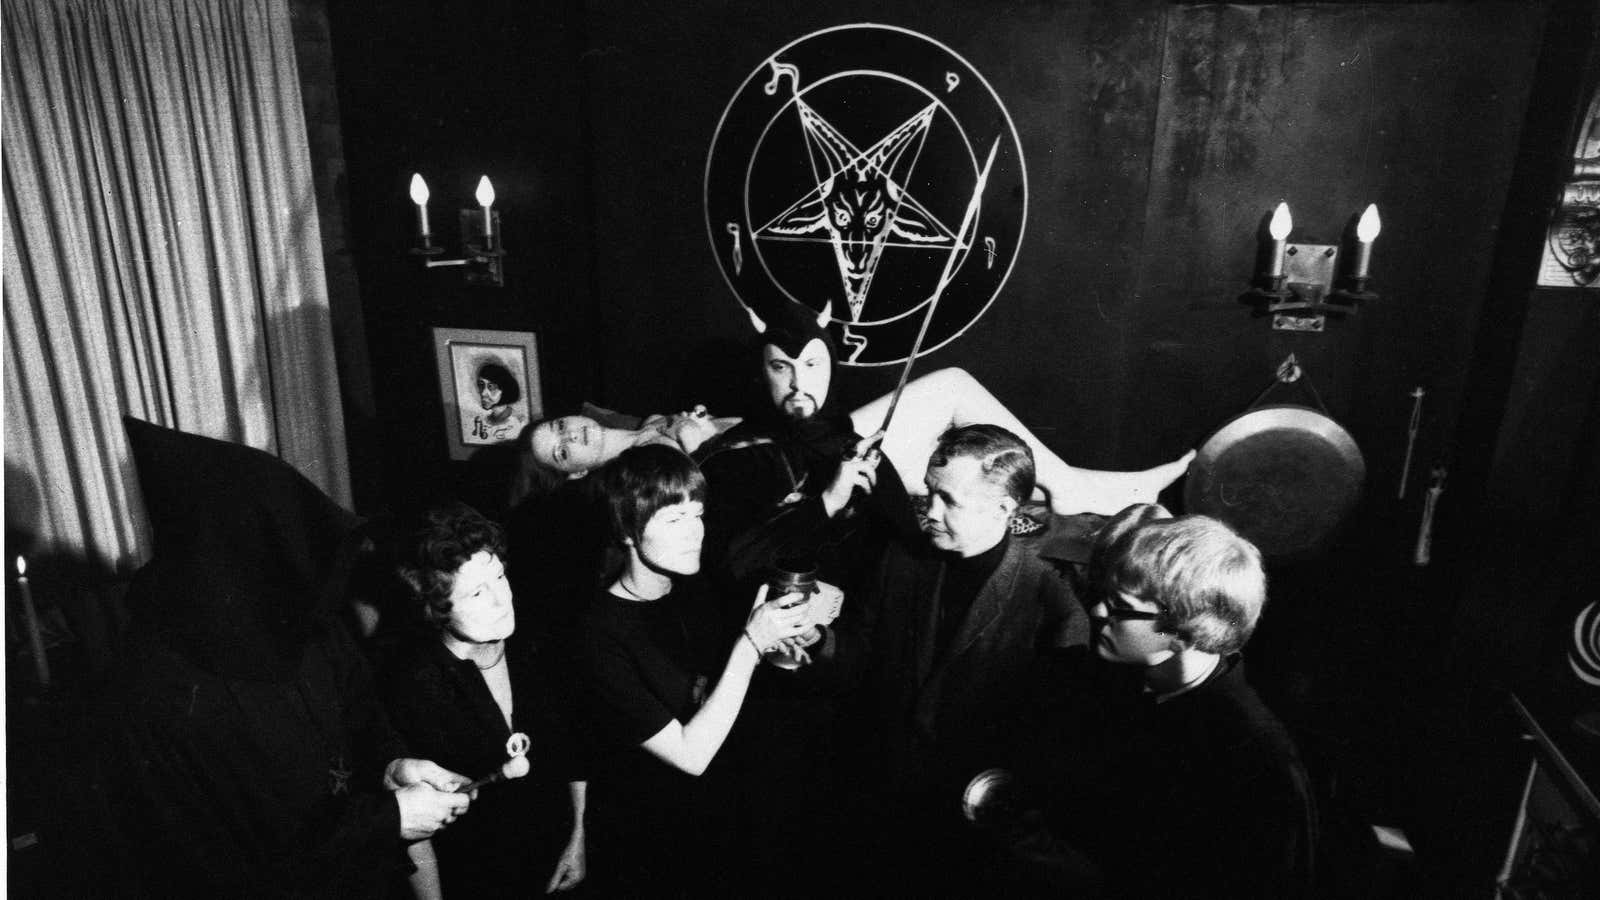 A marriage performed by Church of Satan founder Anton LaVey in 1967.